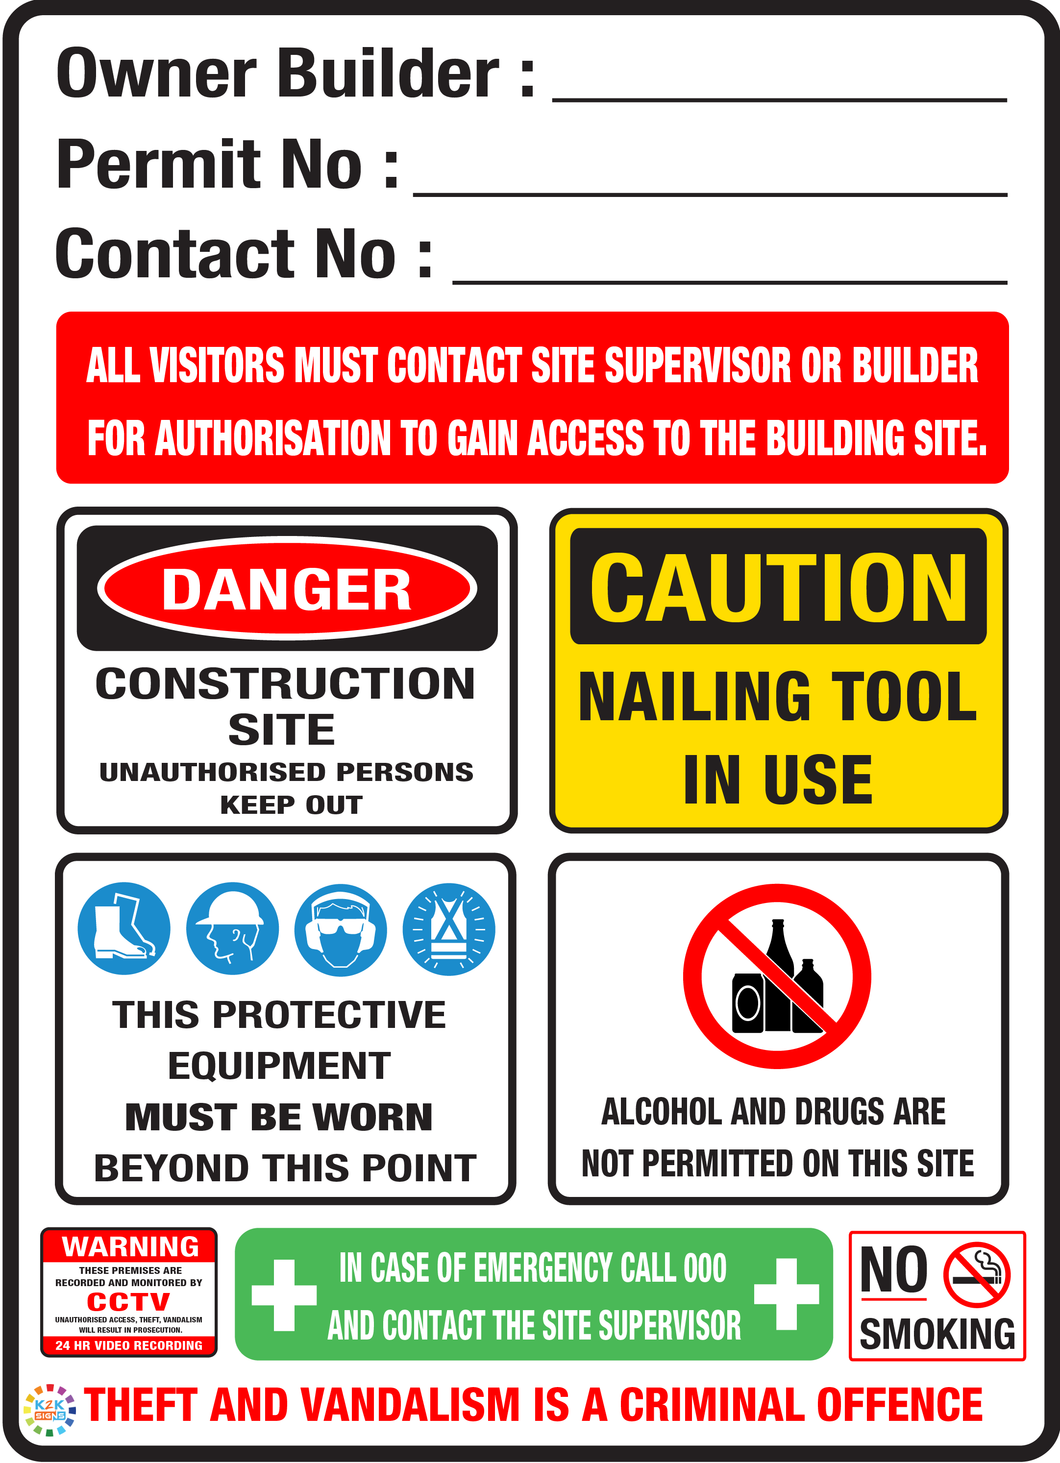 Owner Builder Construction Site With CCTV, No Smoking & More Sign